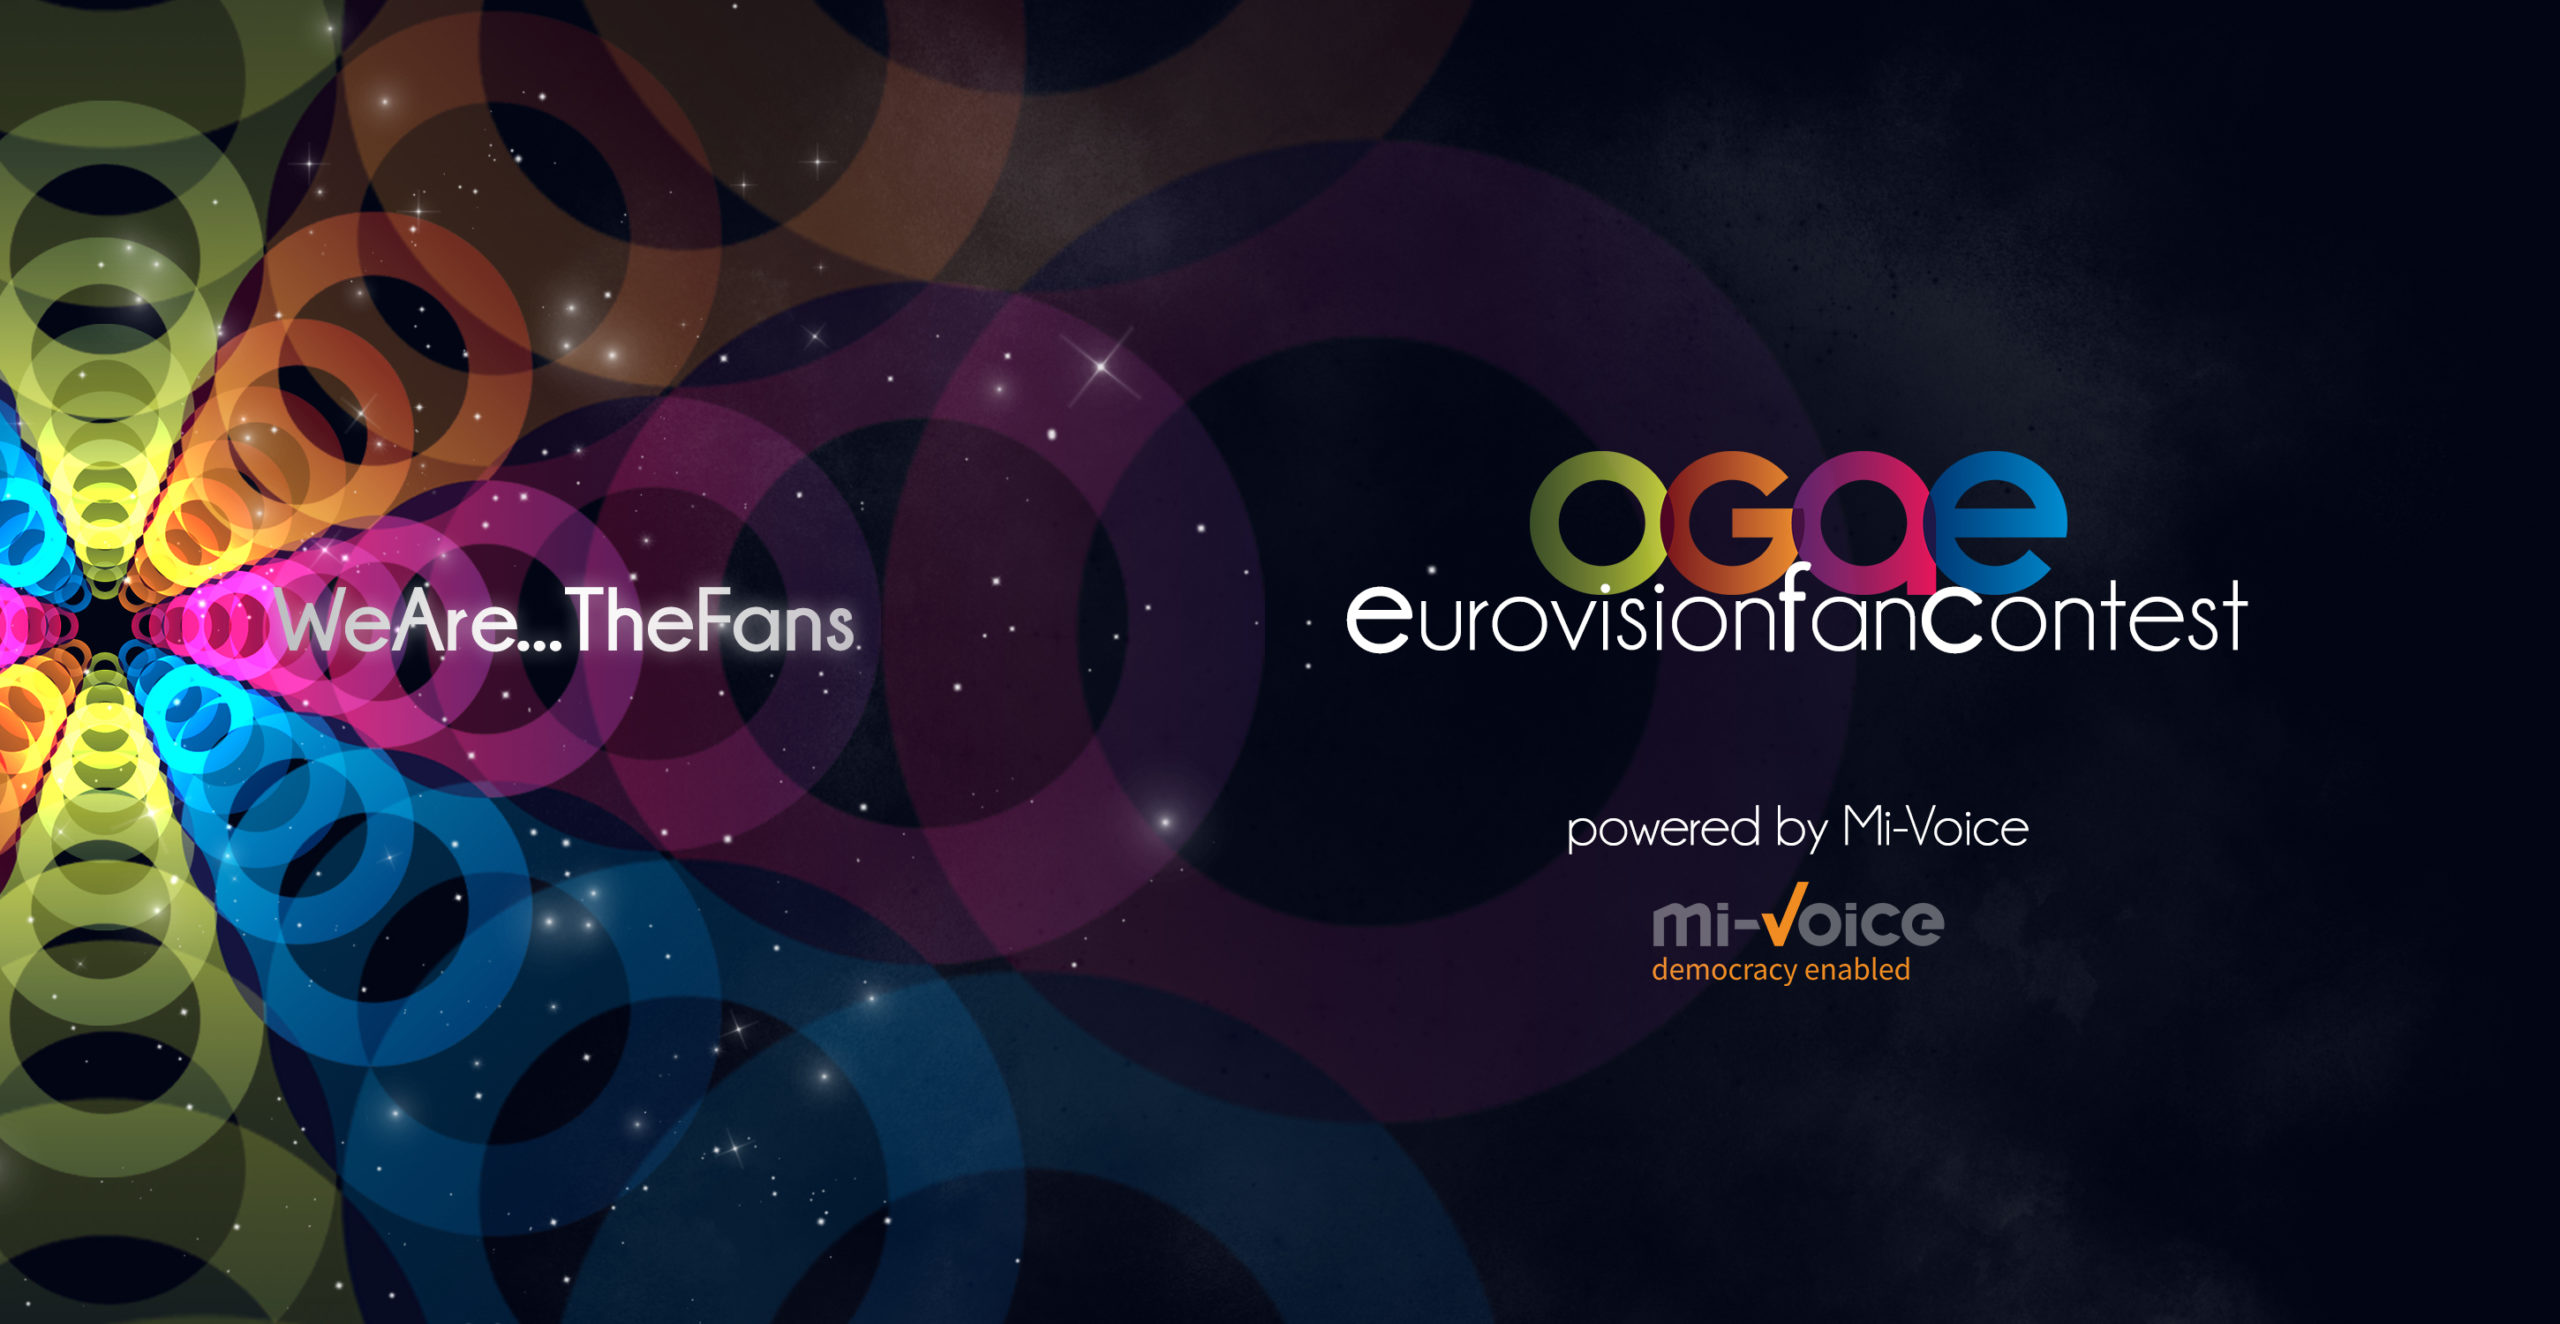 Tonight: Watch OGAE Fan Contest results show